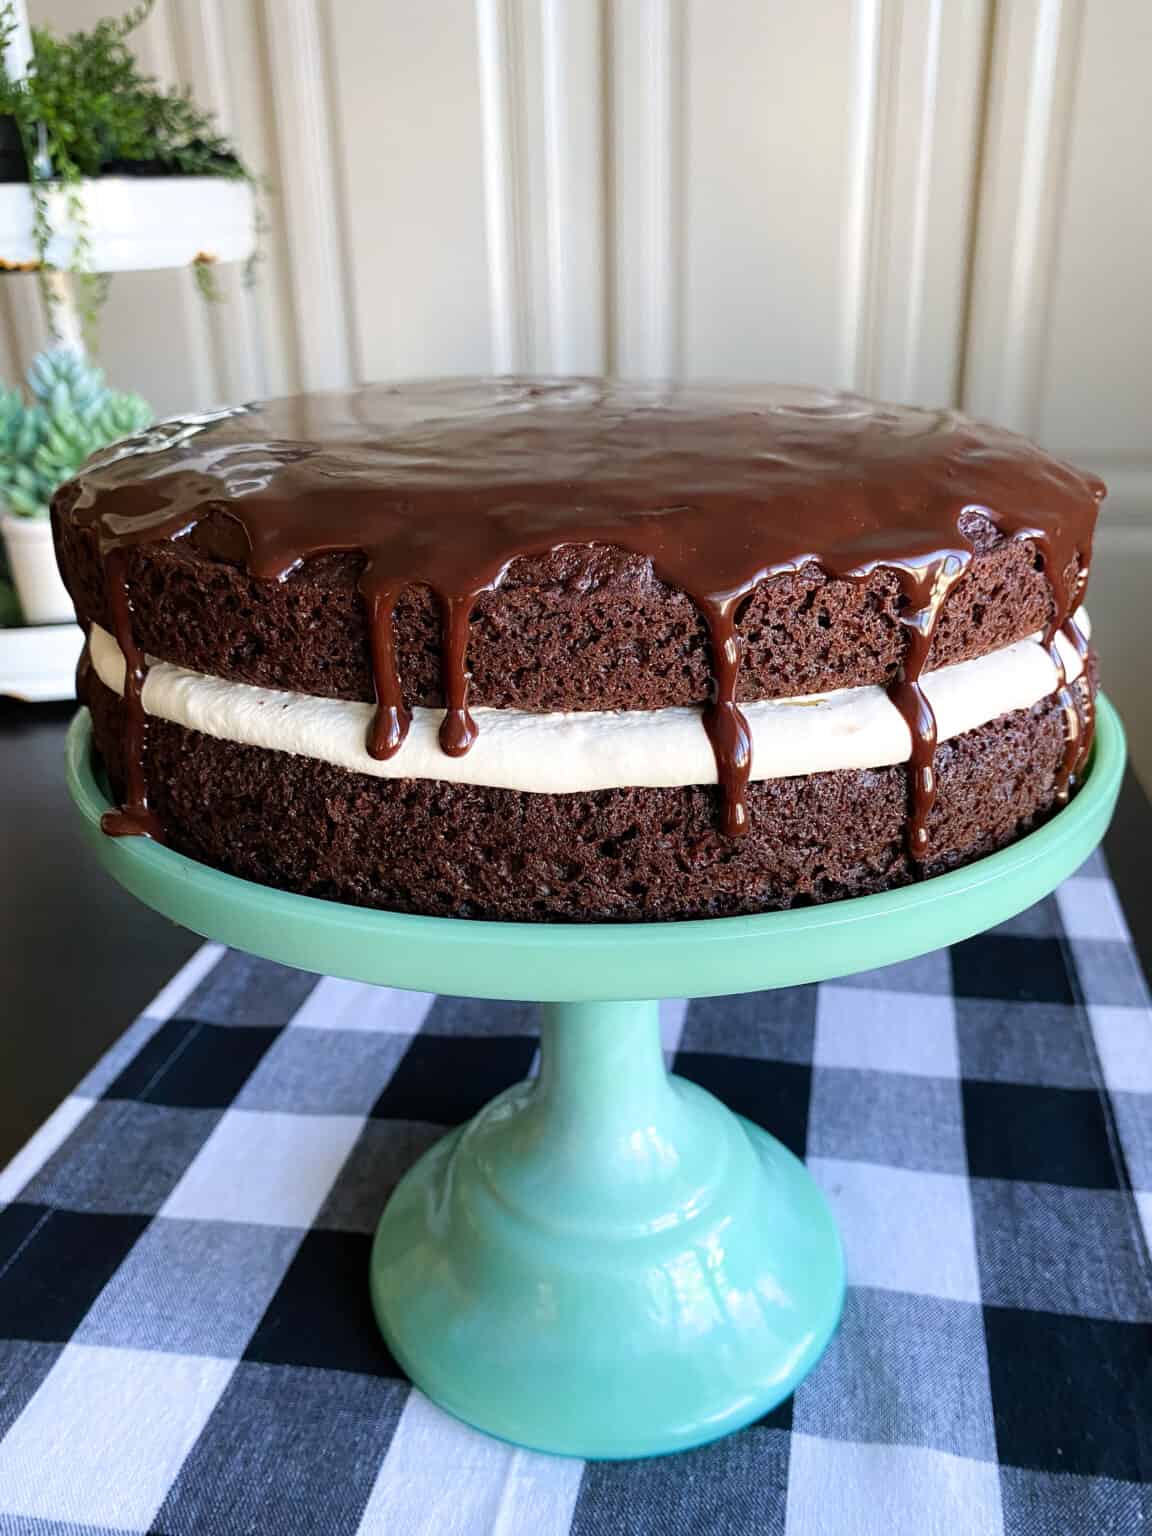 Ding Dong Cake Recipe | Easy Chocolate Cake with Cream Filling